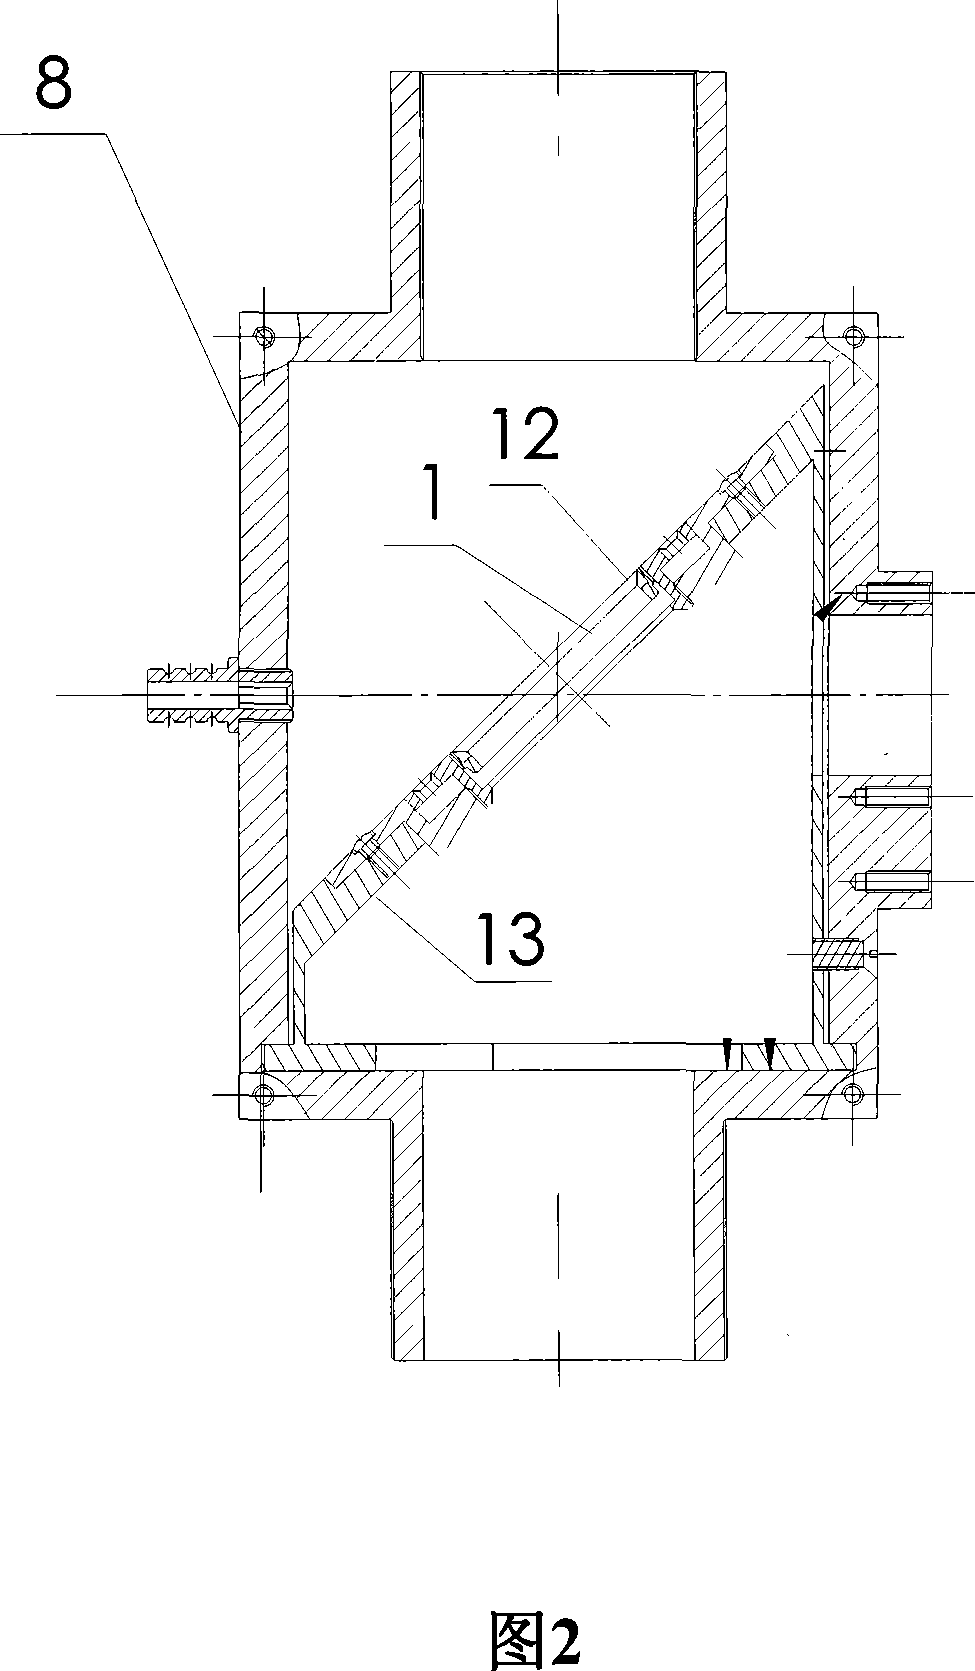 Real time monitoring device of the three-dimensional laser beam welding and incising process